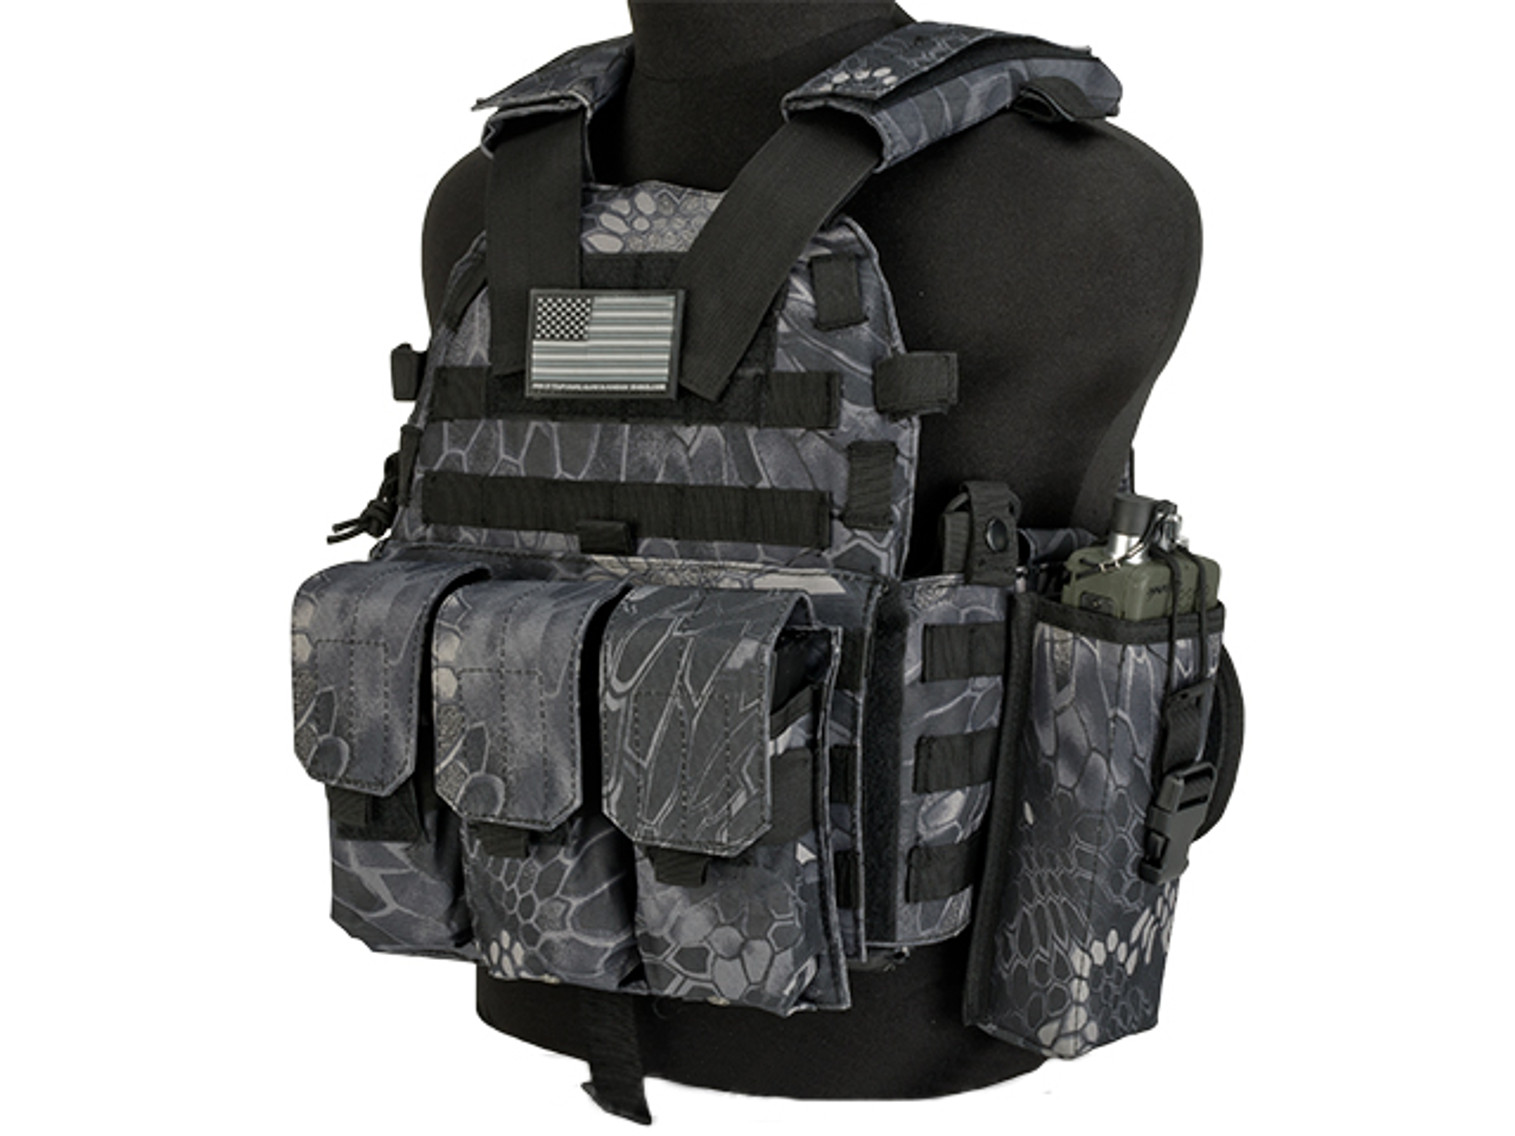 Avengers 6D9T4A Tactical Vest with Magazine and Radio Pouches - Urban Serpent